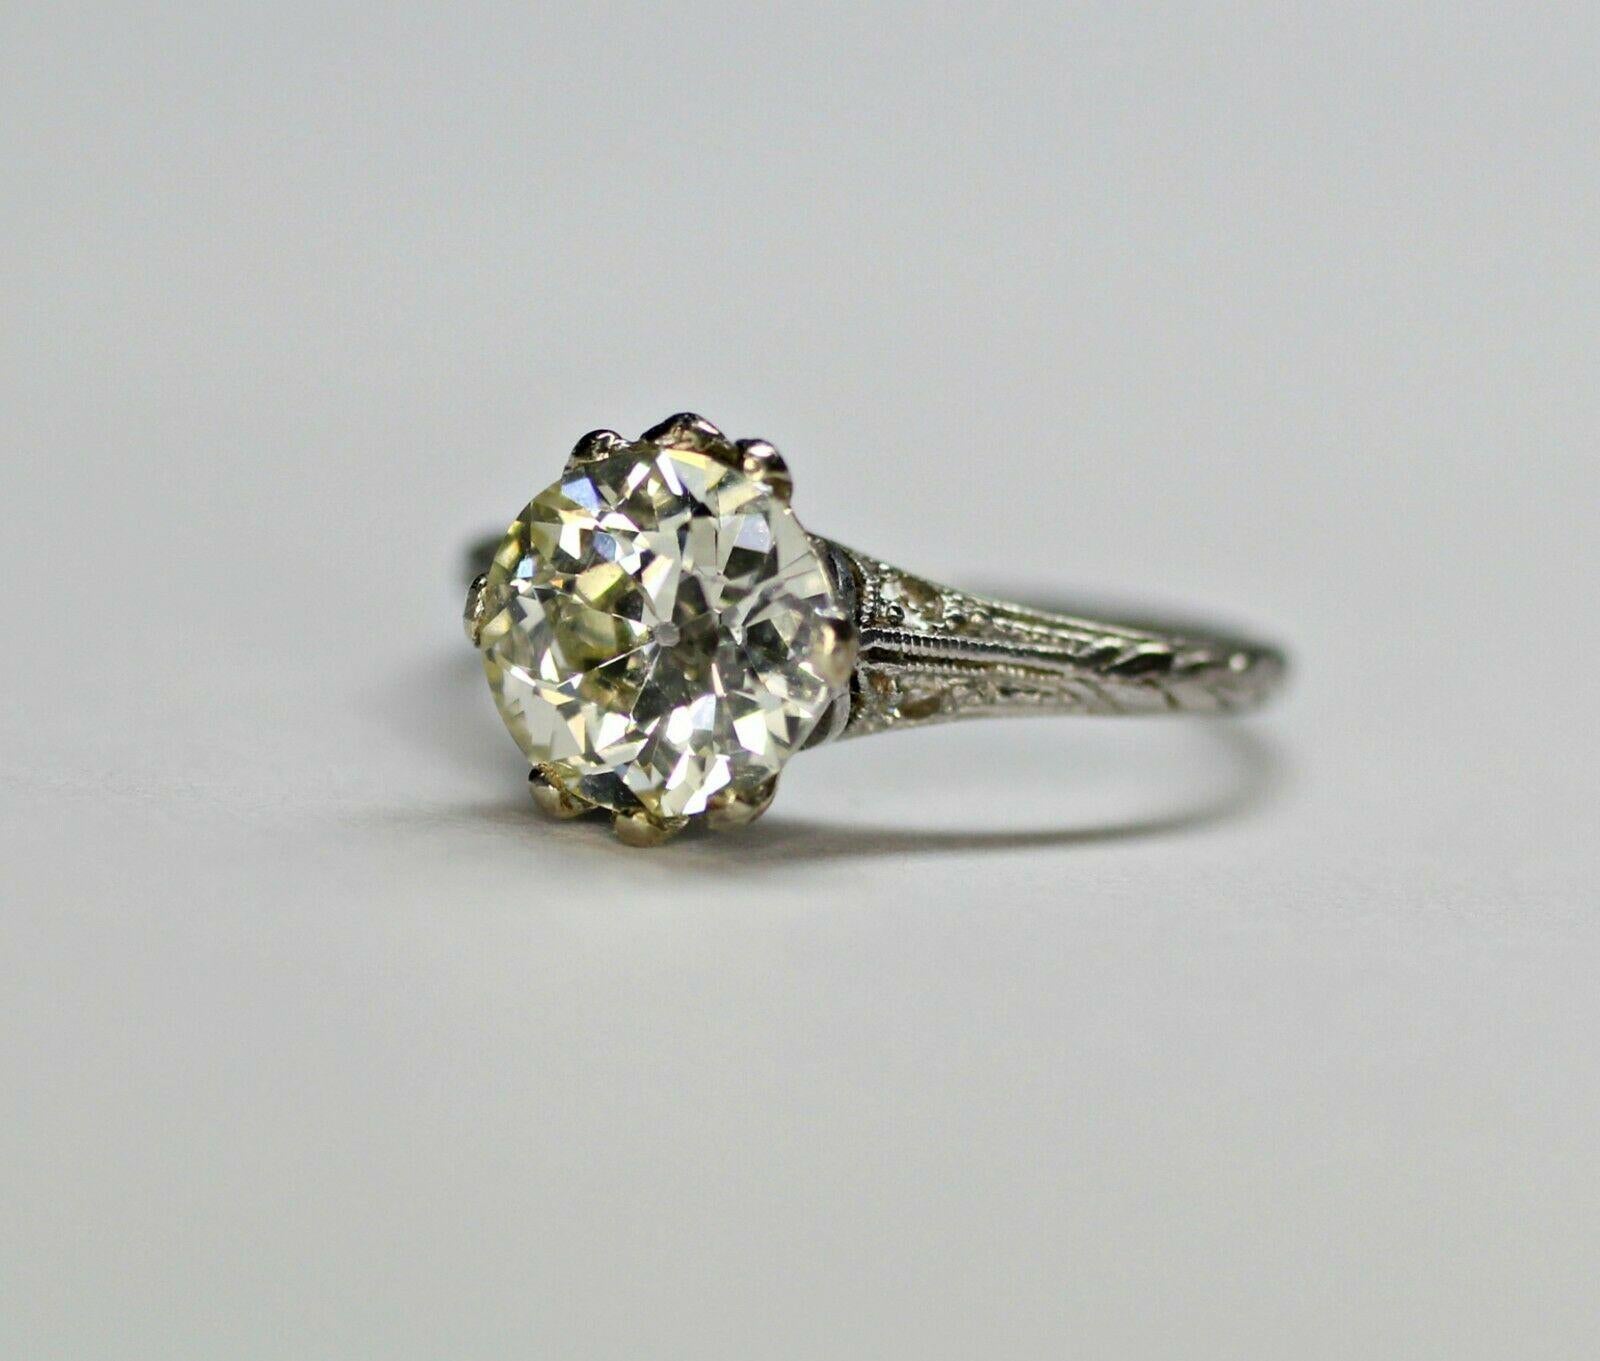  This is an antique platinum ring with a 1.59 carat Old European cut diamond center, K color, VS1 clarity. The ring has an engraving inside its shank, but it can be removed upon request. It has a current ring size of 5US that can be resize for free.